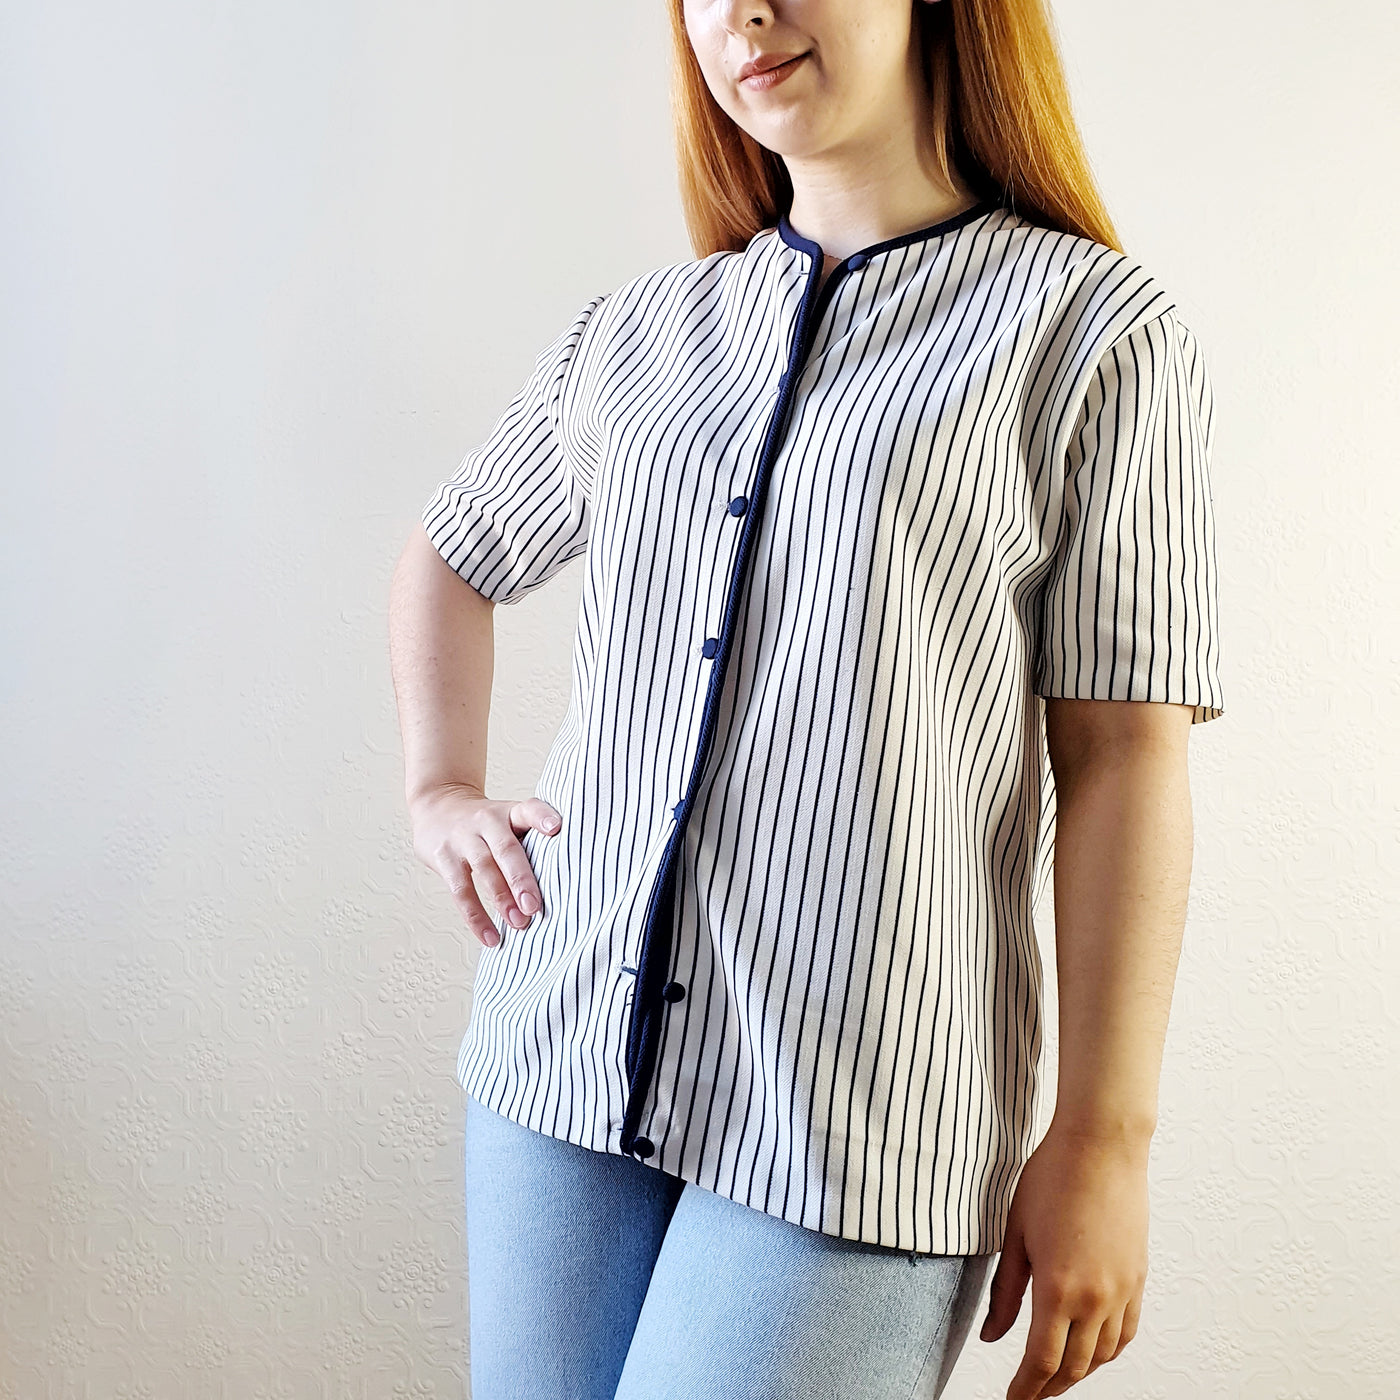 French Jersey Striped Top - XL